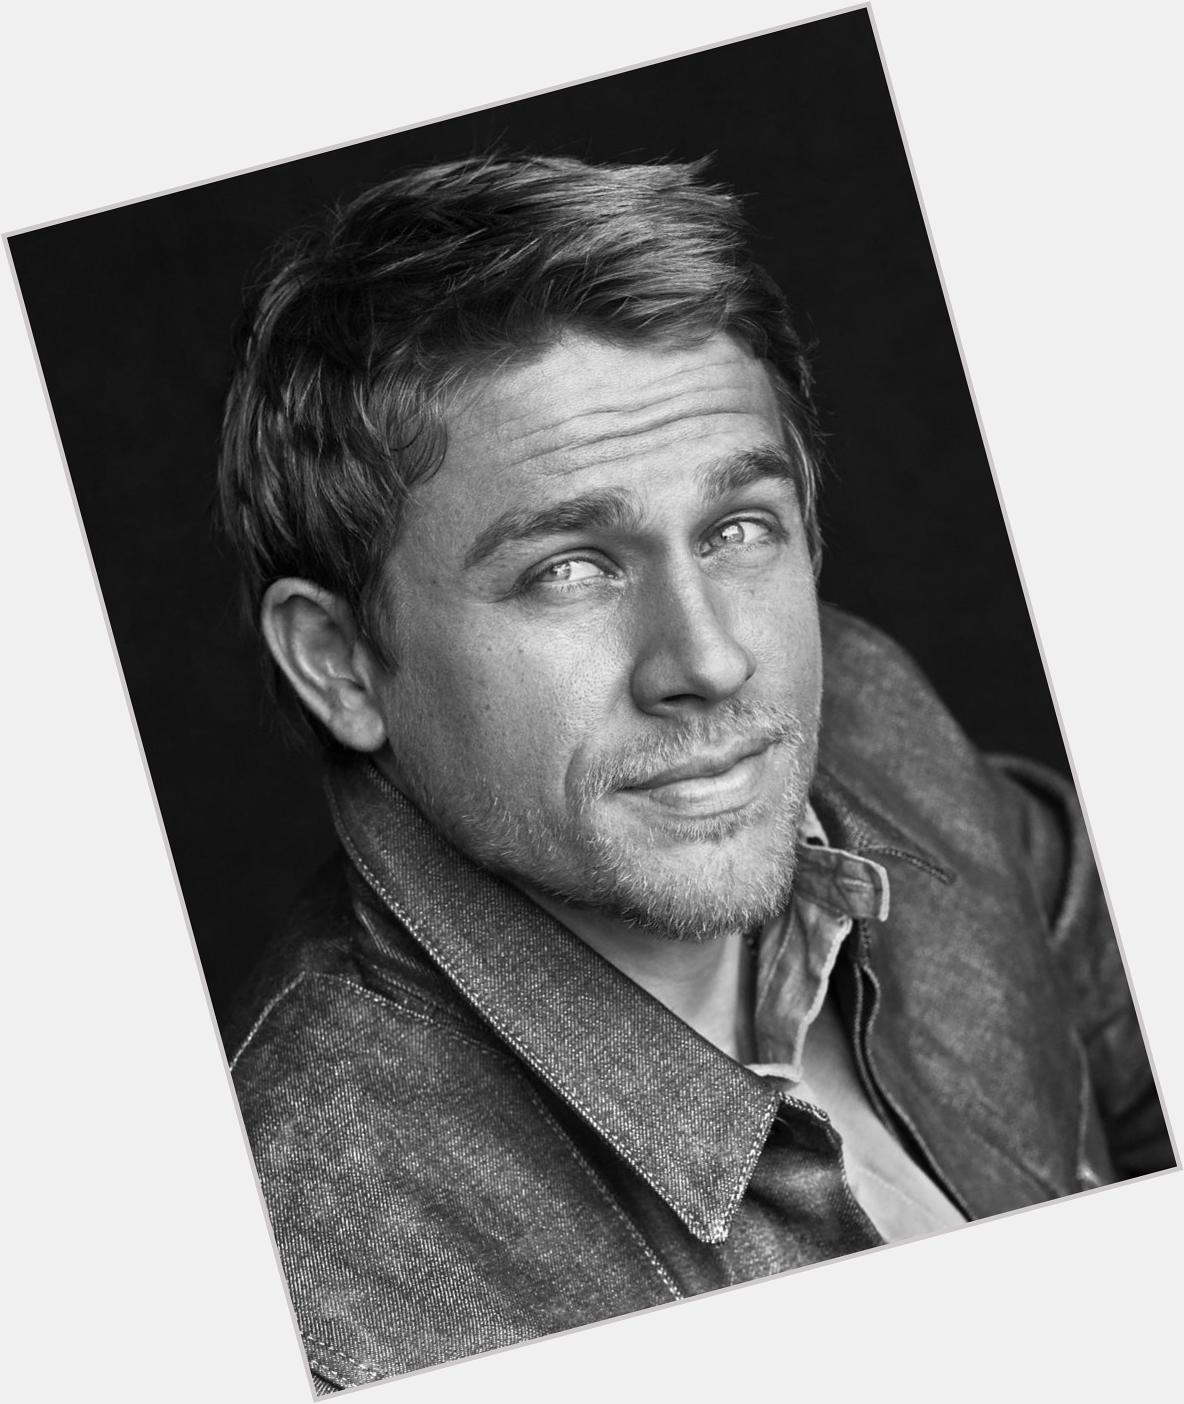 Happy birthday Charlie Hunnam, he\s 35 today. Here he is looking like James Dean. 